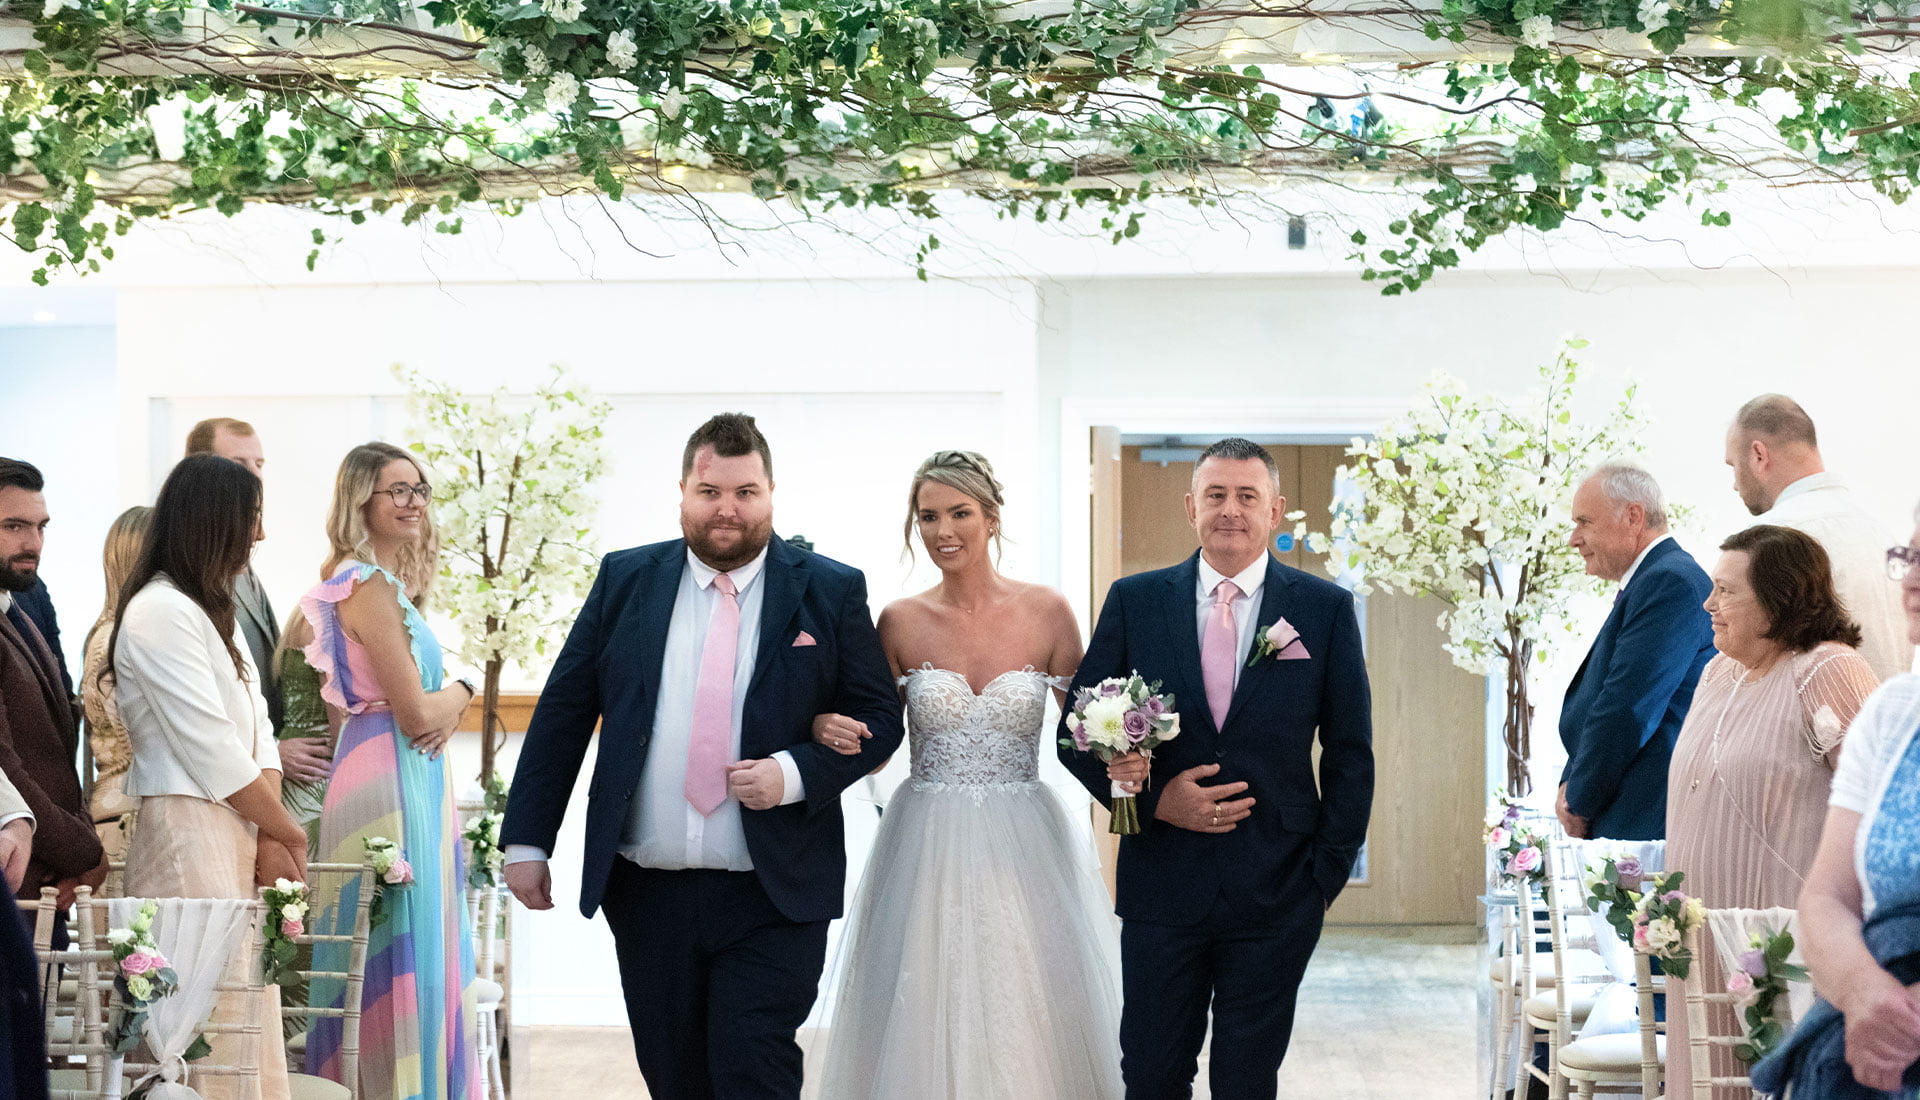 Top Bridal Entrance songs to make your walk down the aisle memorable!